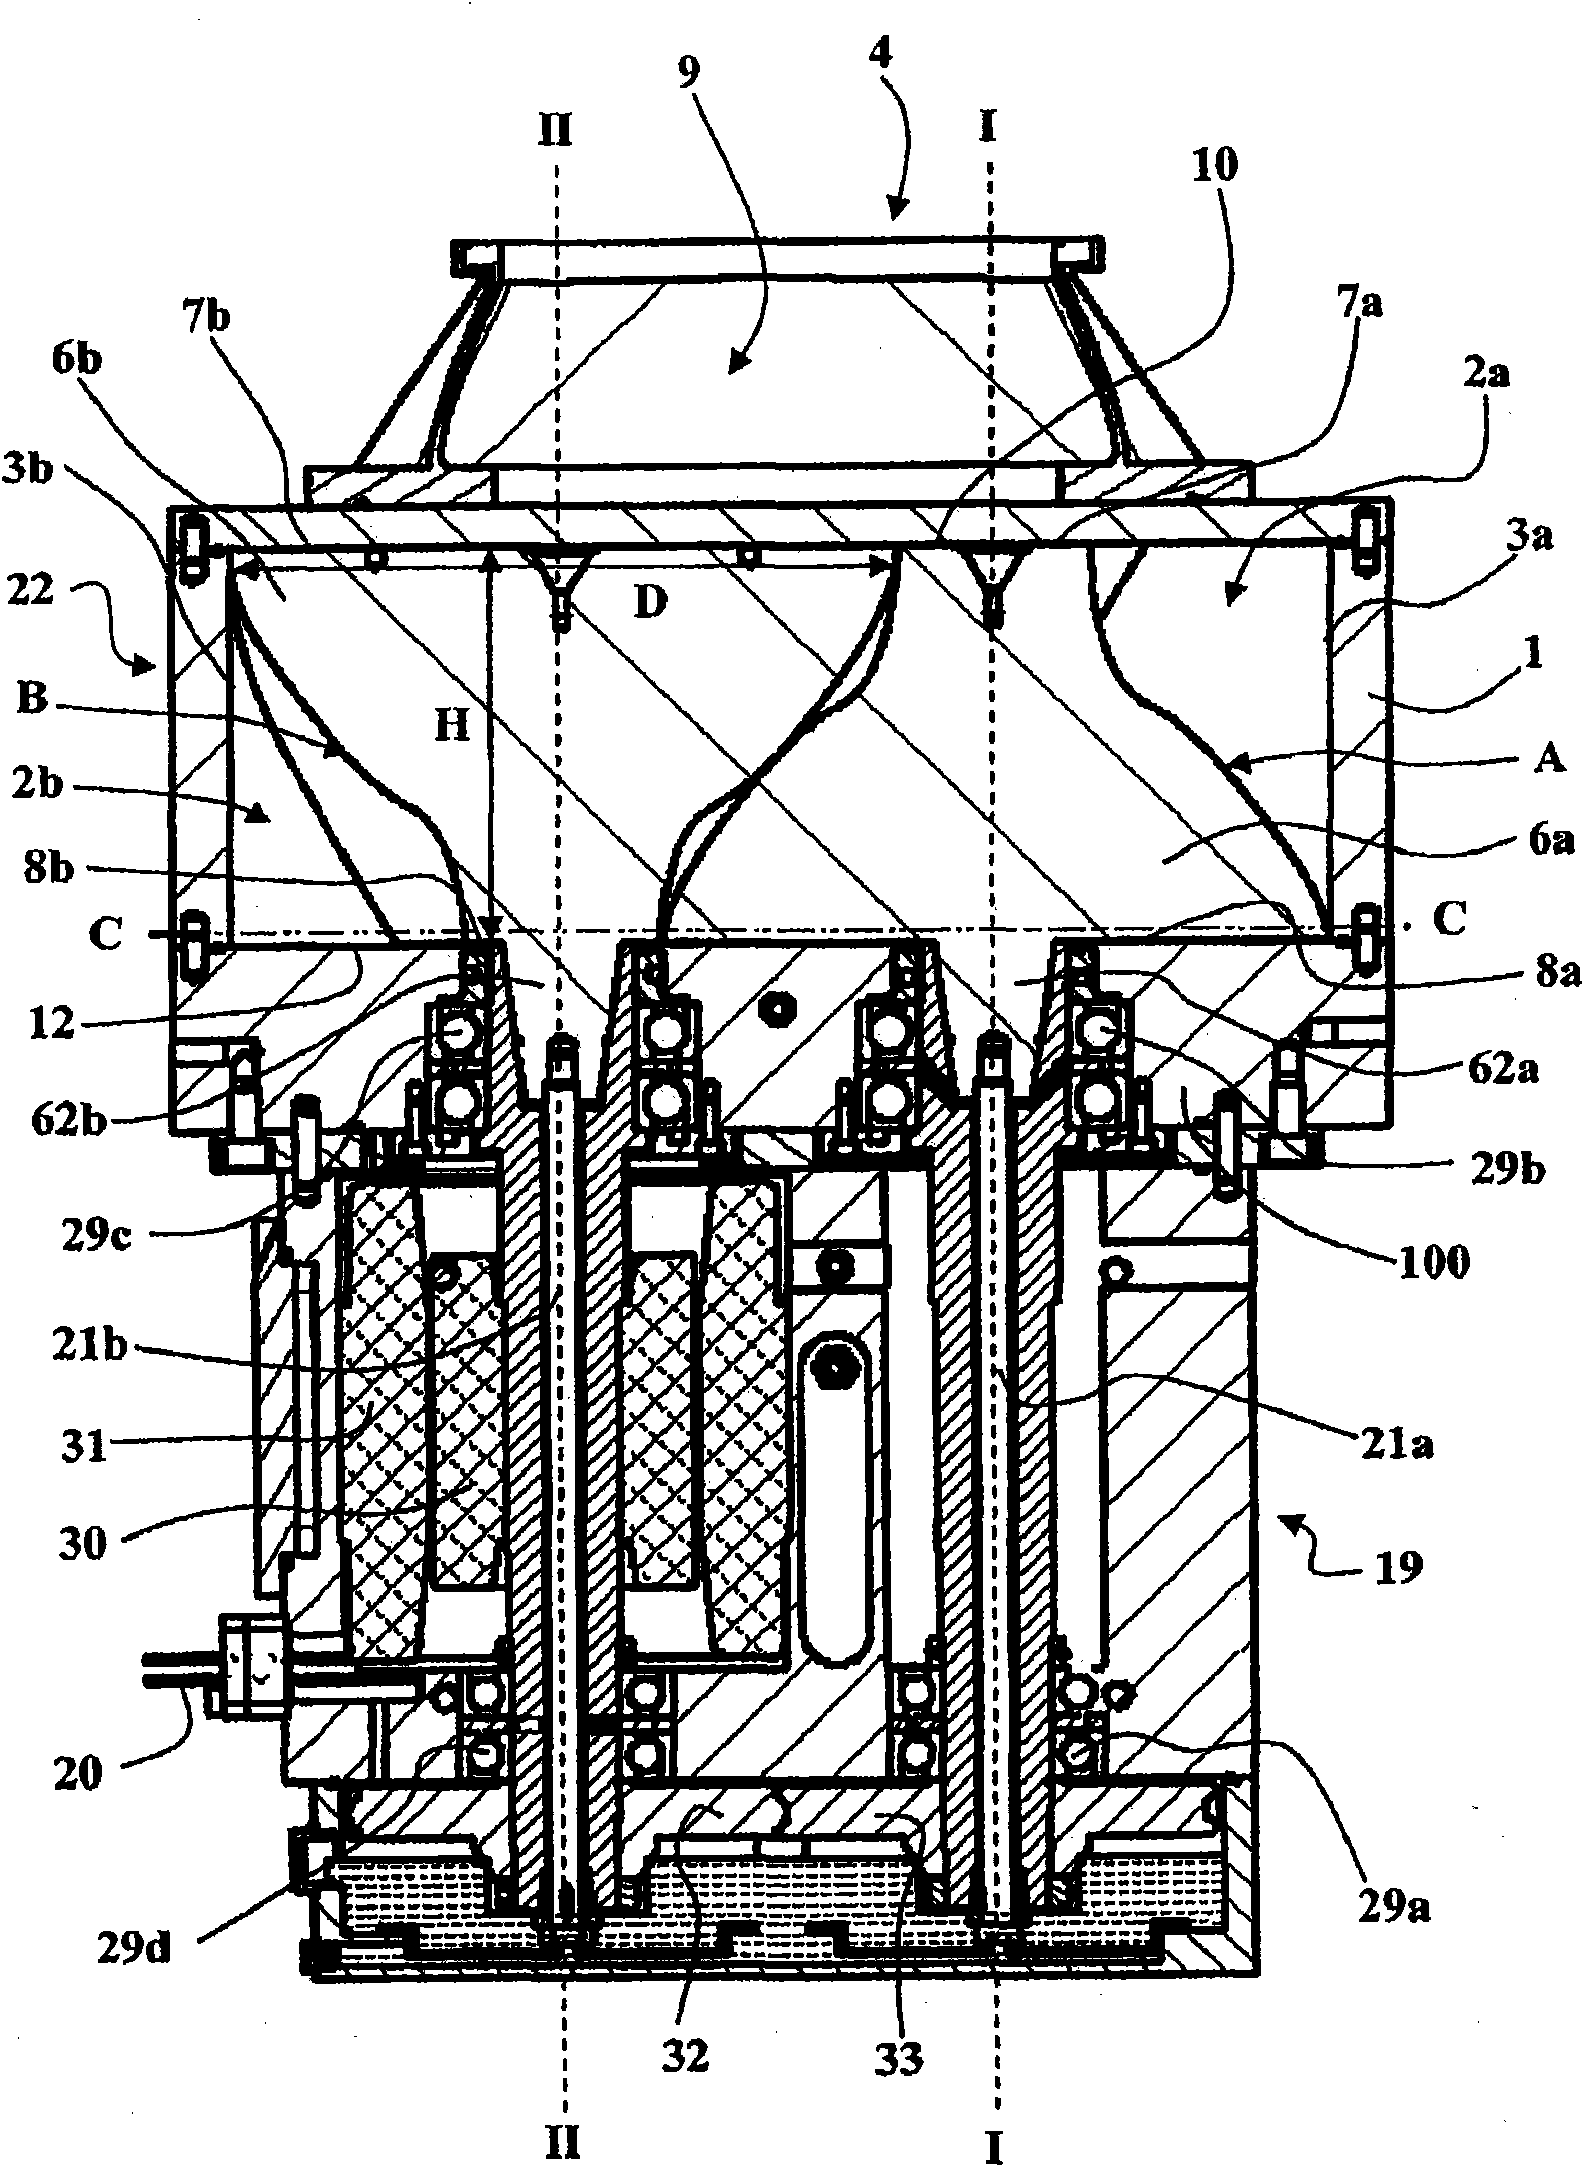 Vacuum pump with two helical rotors